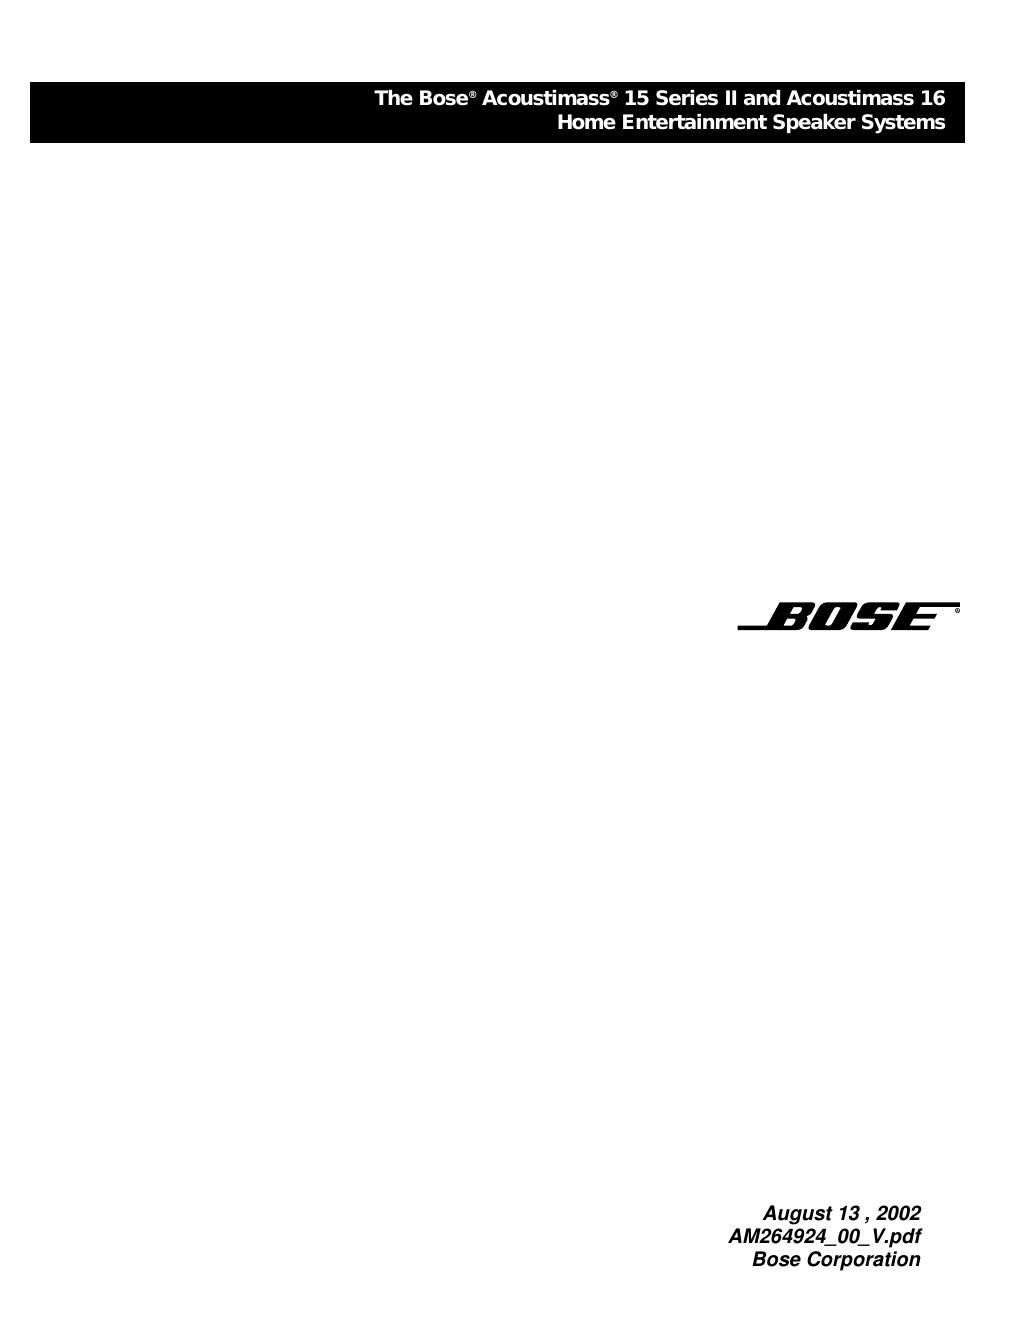 bose acoustimass 16 owners guide